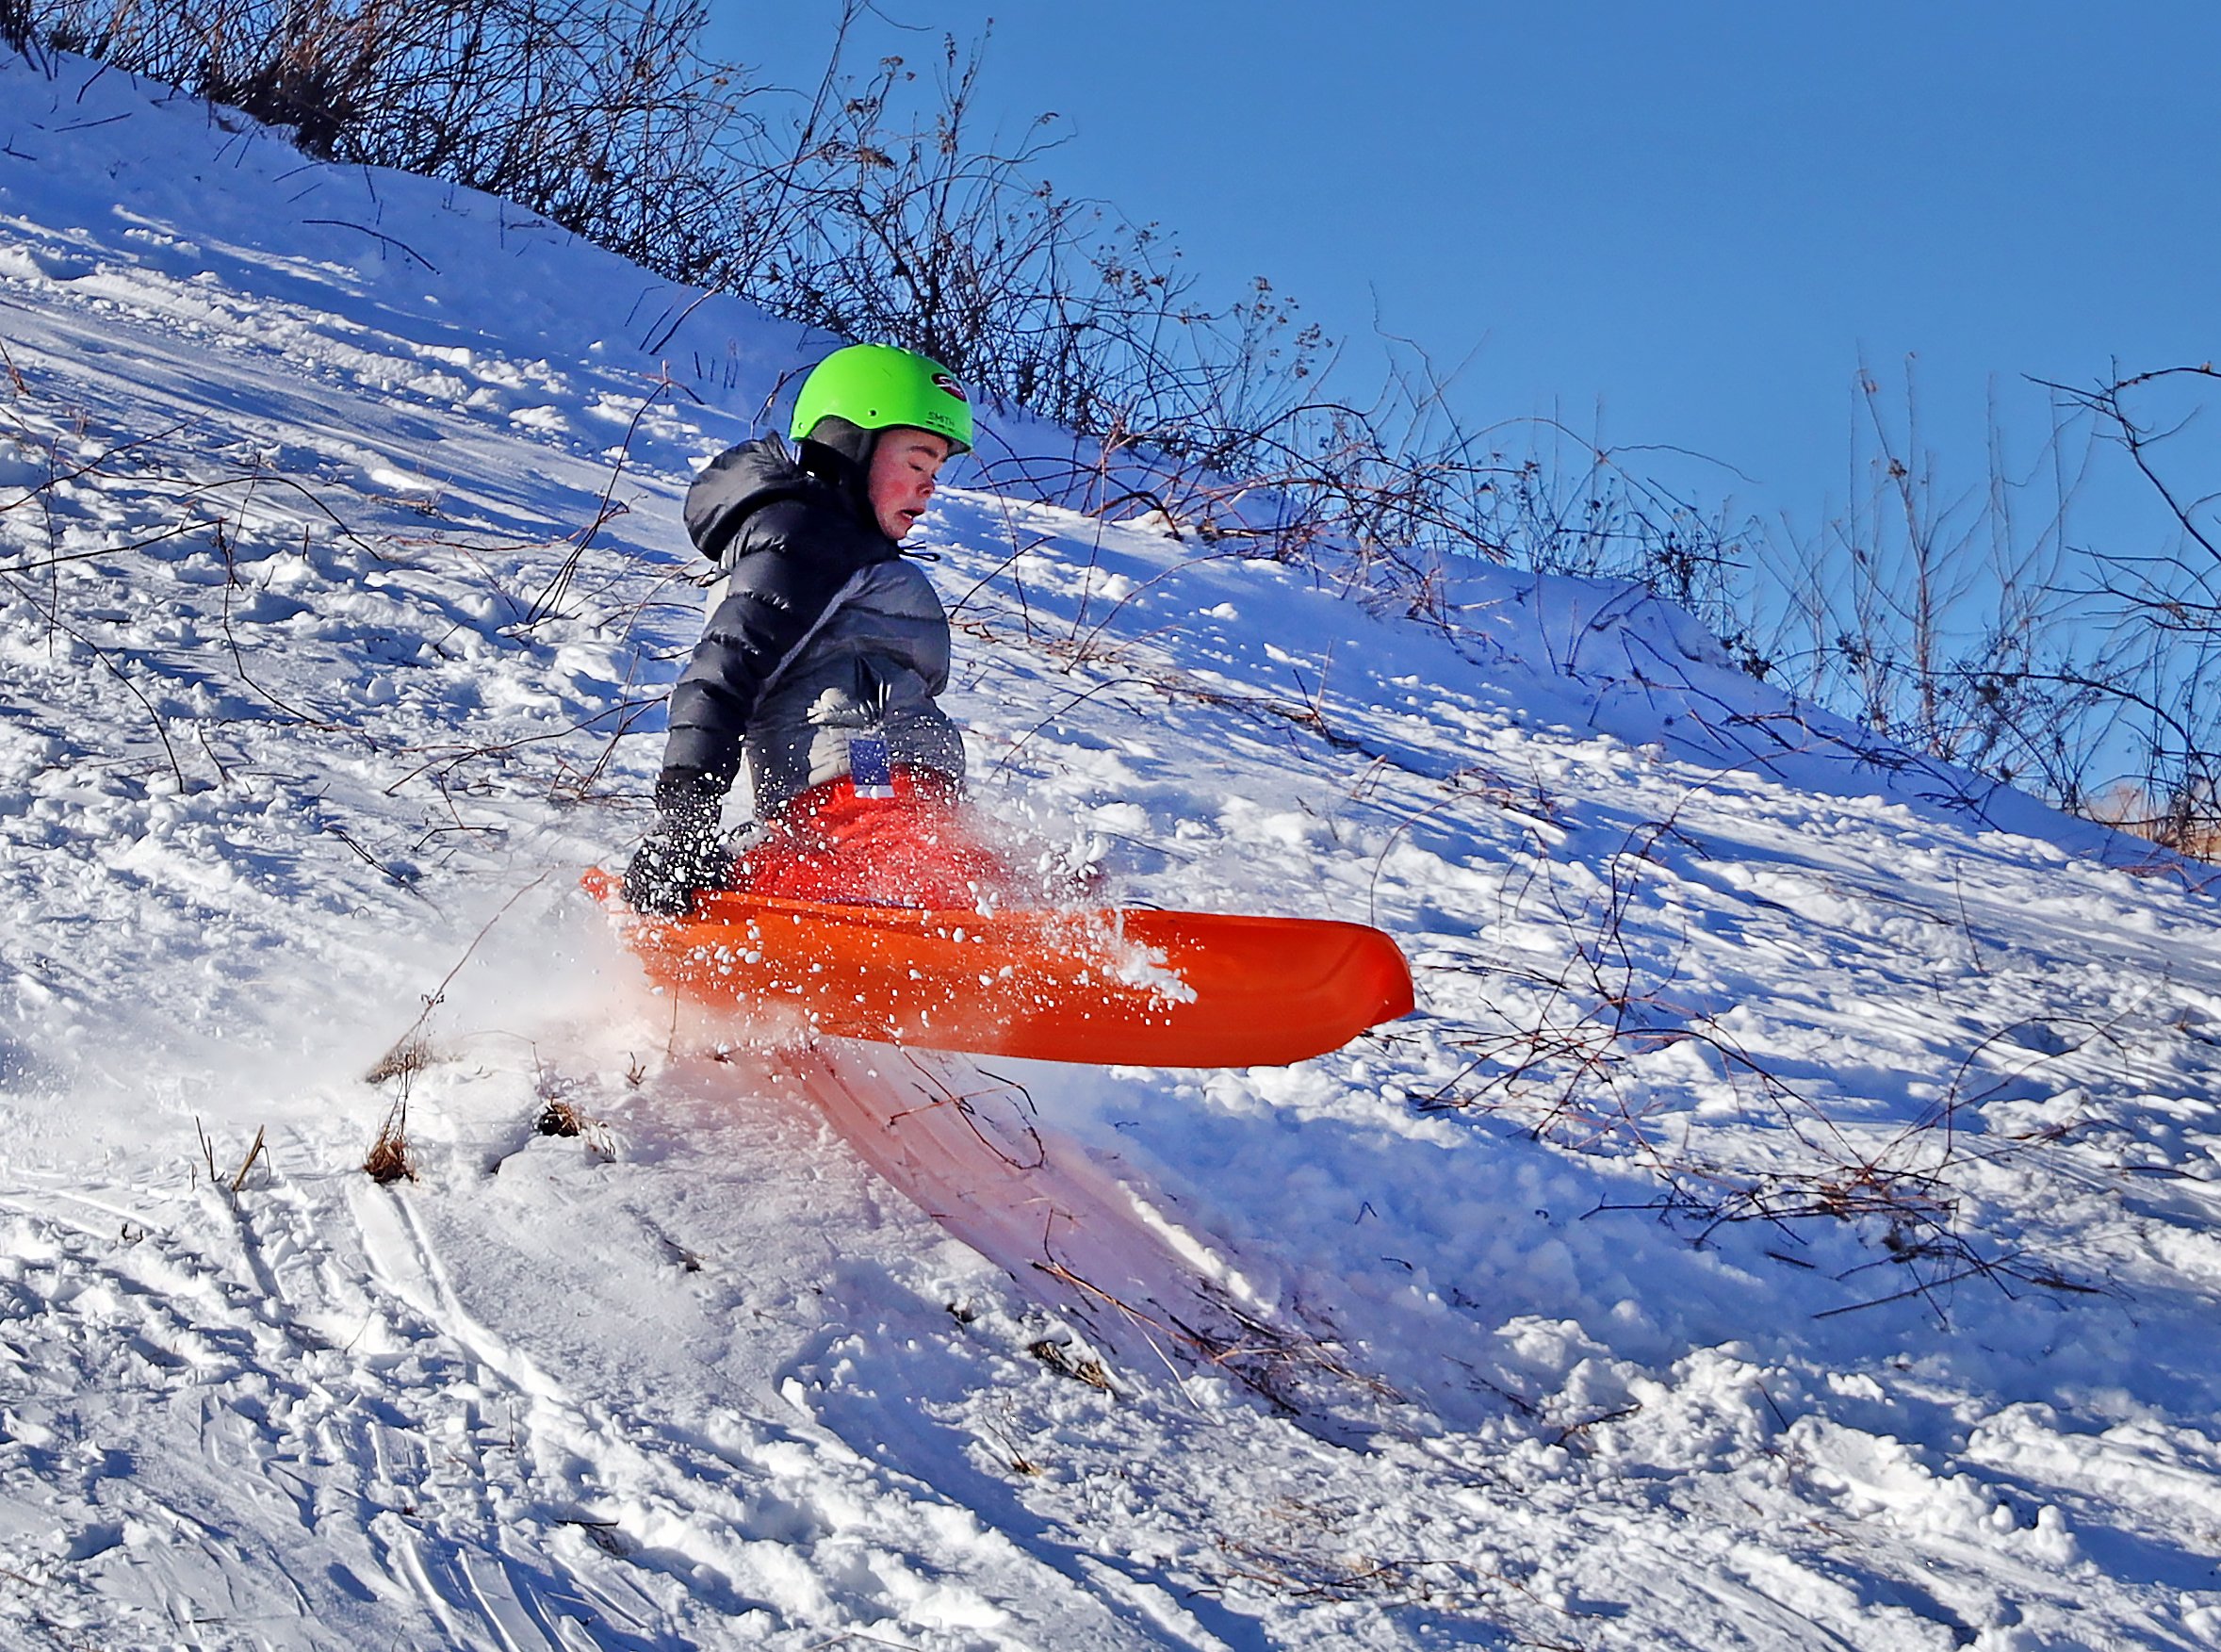  Greason Eley catches some air on the sledding hill at Crossett Brook Middle School on a perfect January Saturday. Photo by Gordon Miller 